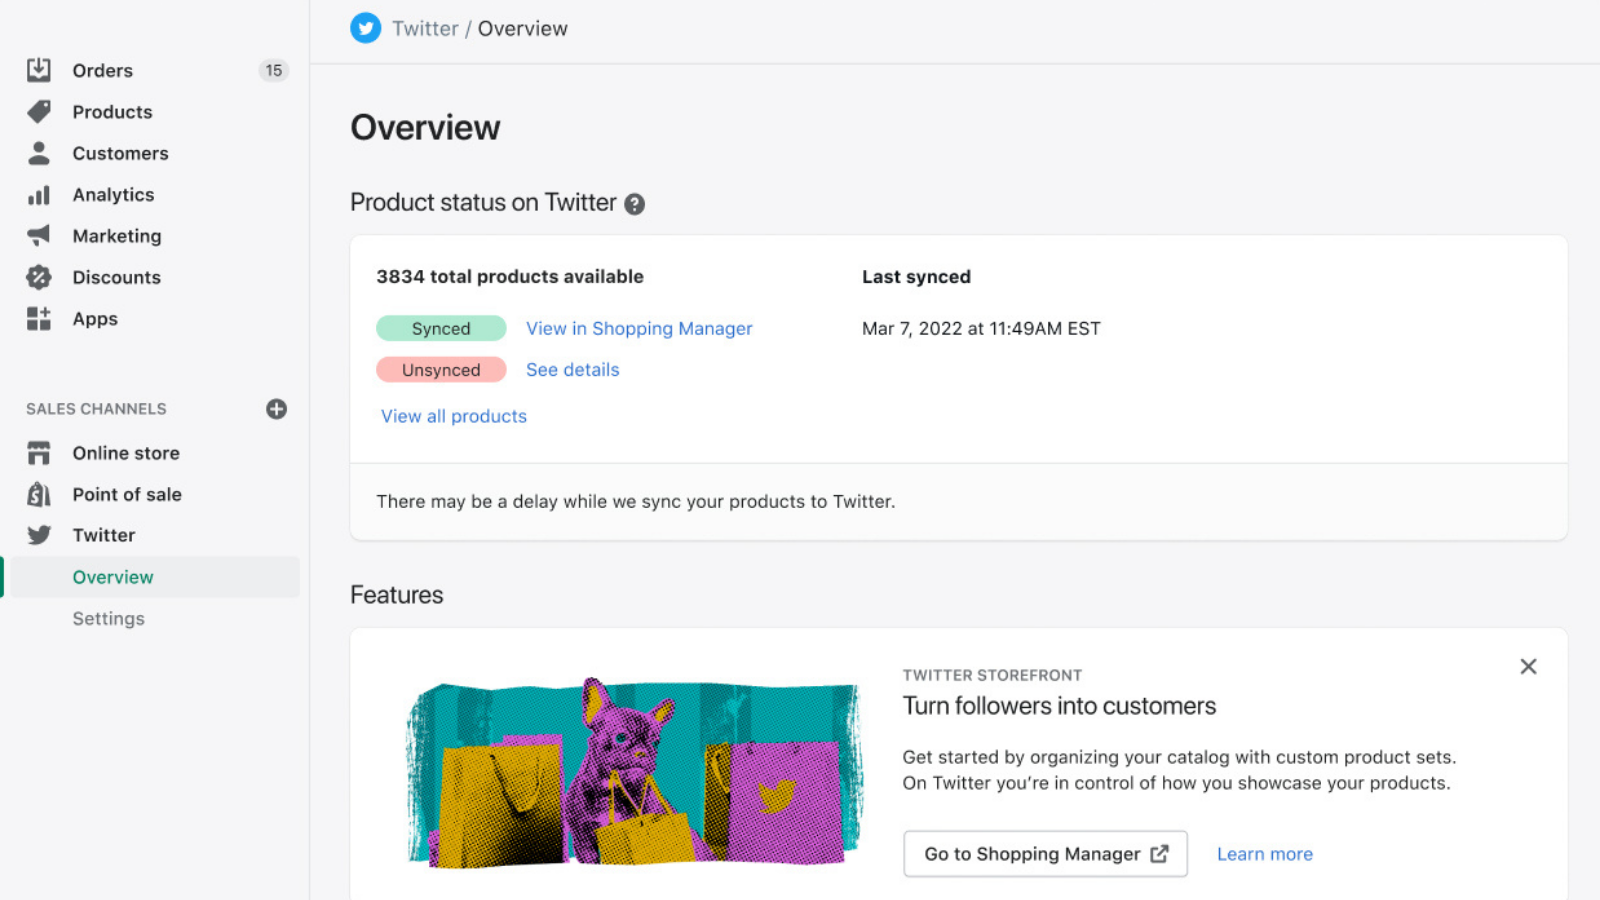 Twitter sales channel overview page